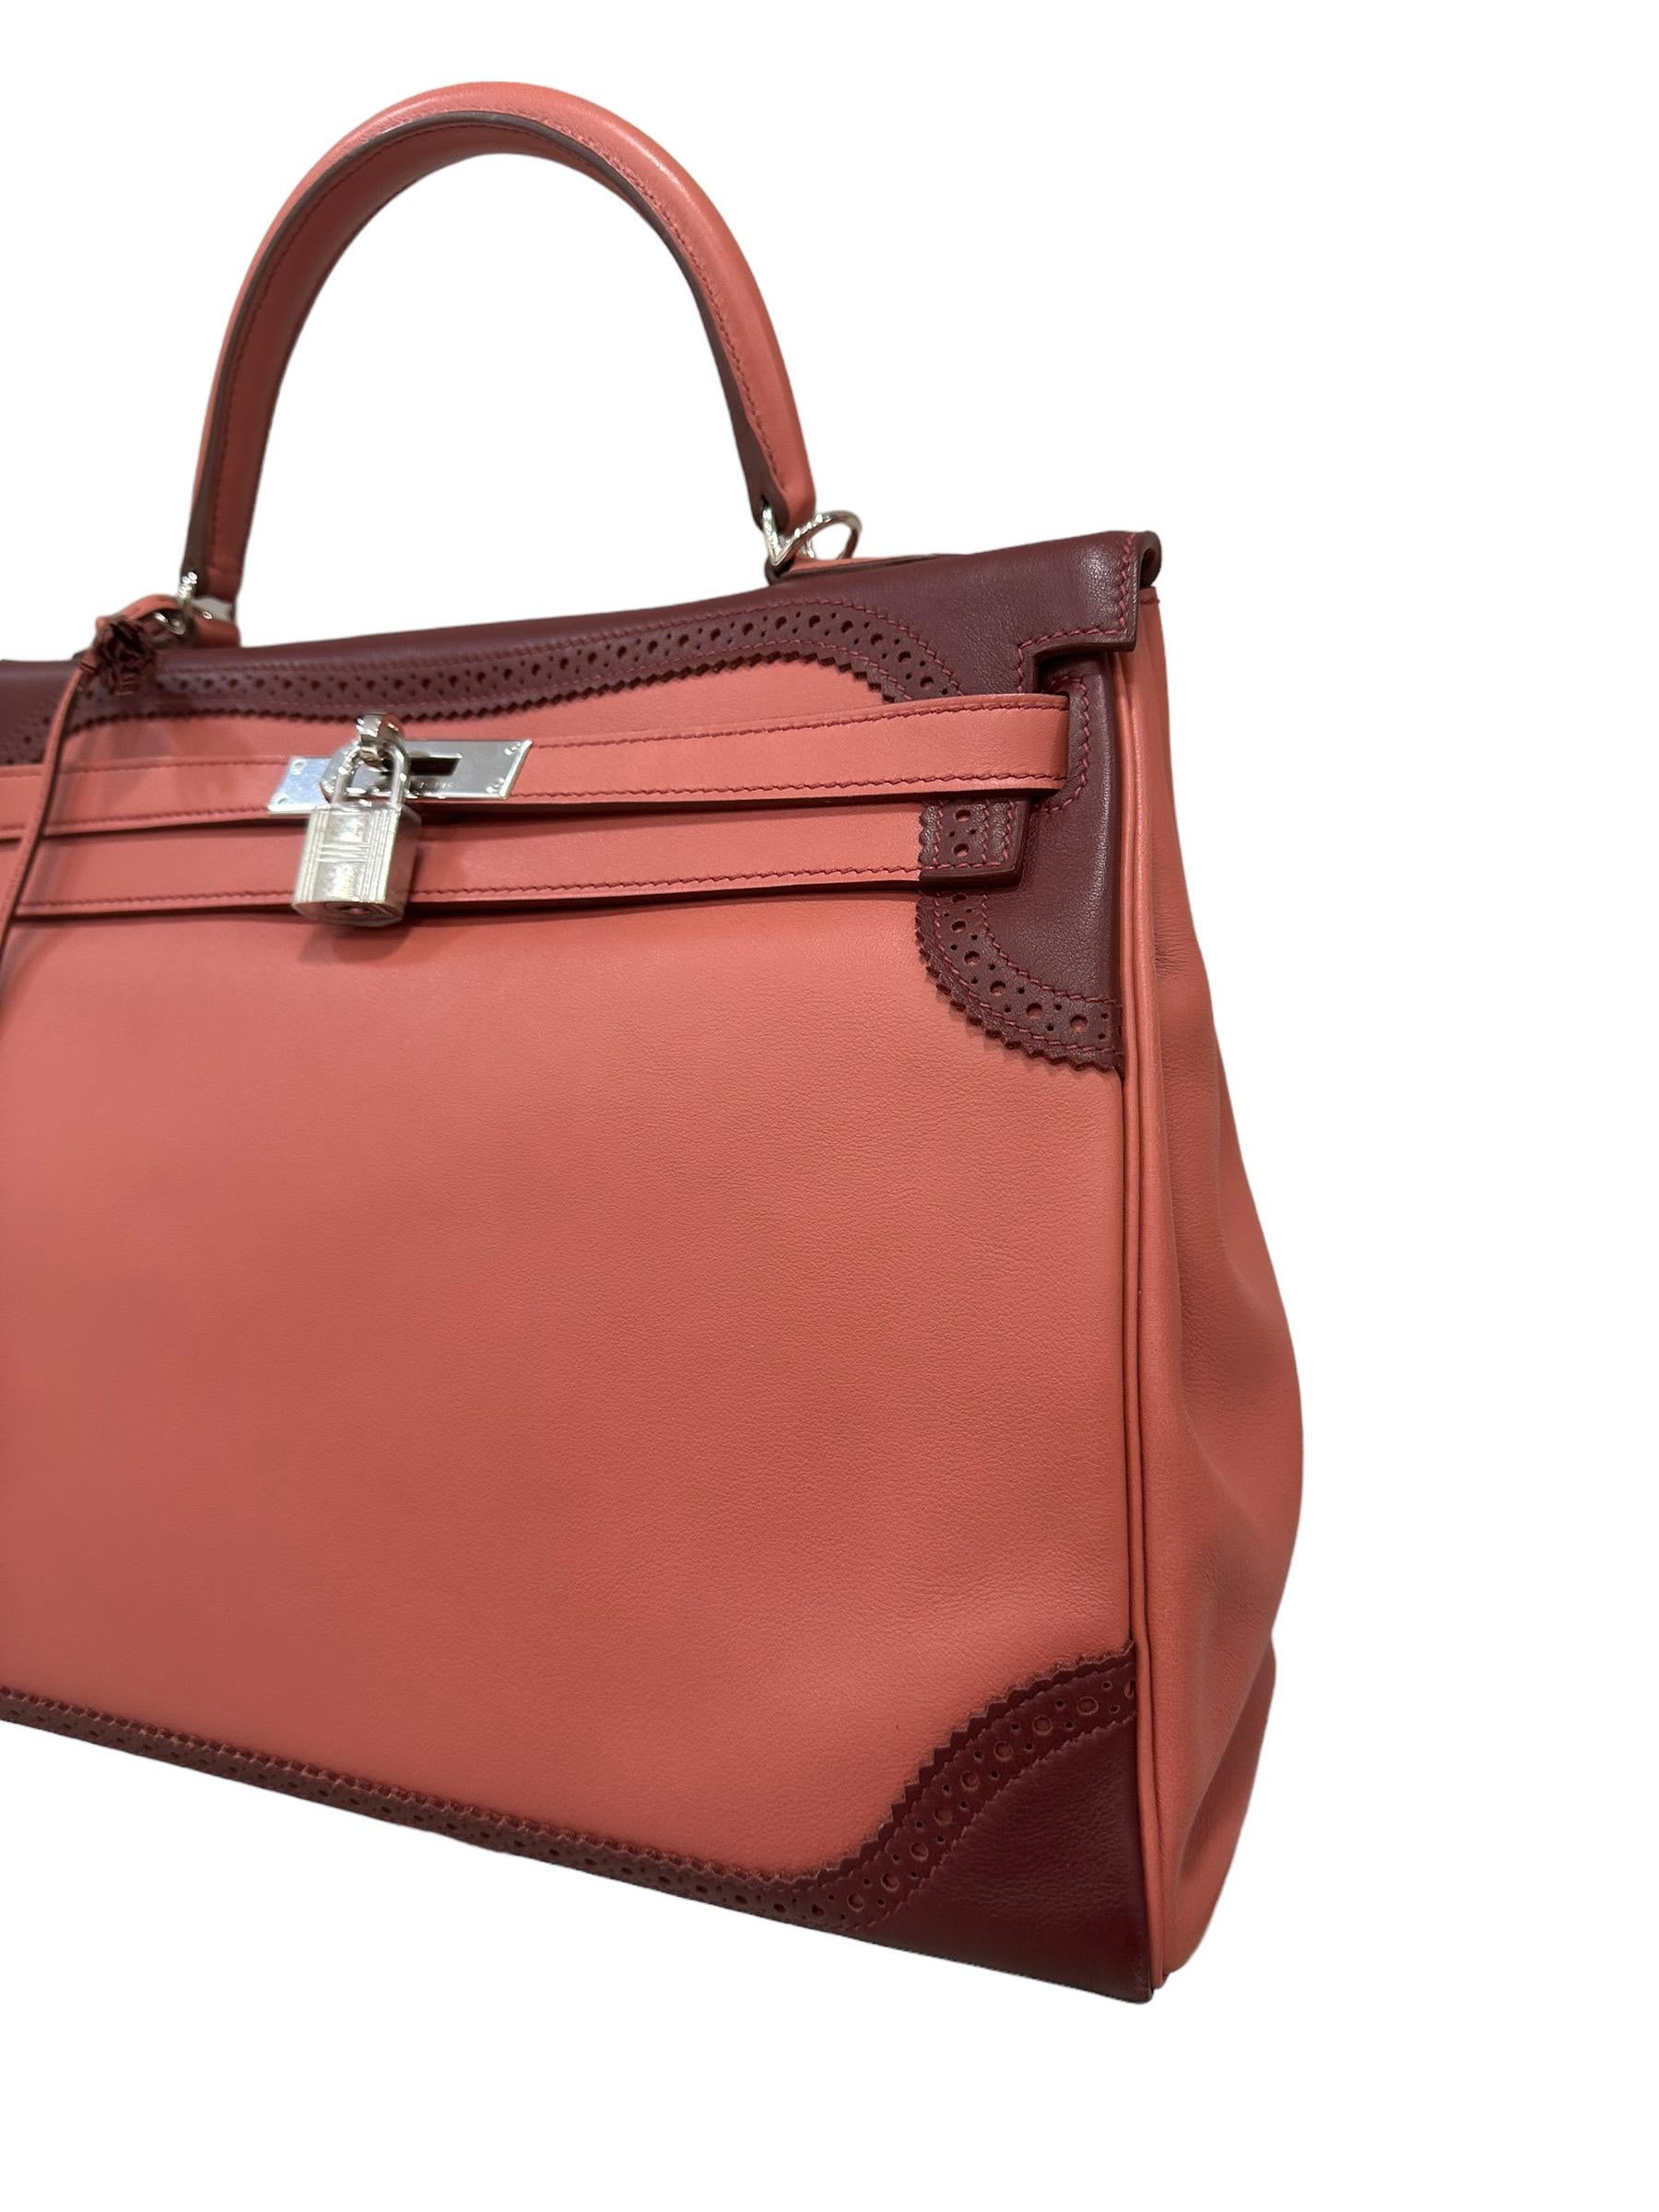 Bag by Hermès, Kelly Ghillies model, size 35, made of evercalf leather, smooth and soft to the touch, in the two-tone Rose Texas and Rouge H colourway. Equipped with a flap with interlocking closure, with horizontal band, padlock and keys. Equipped